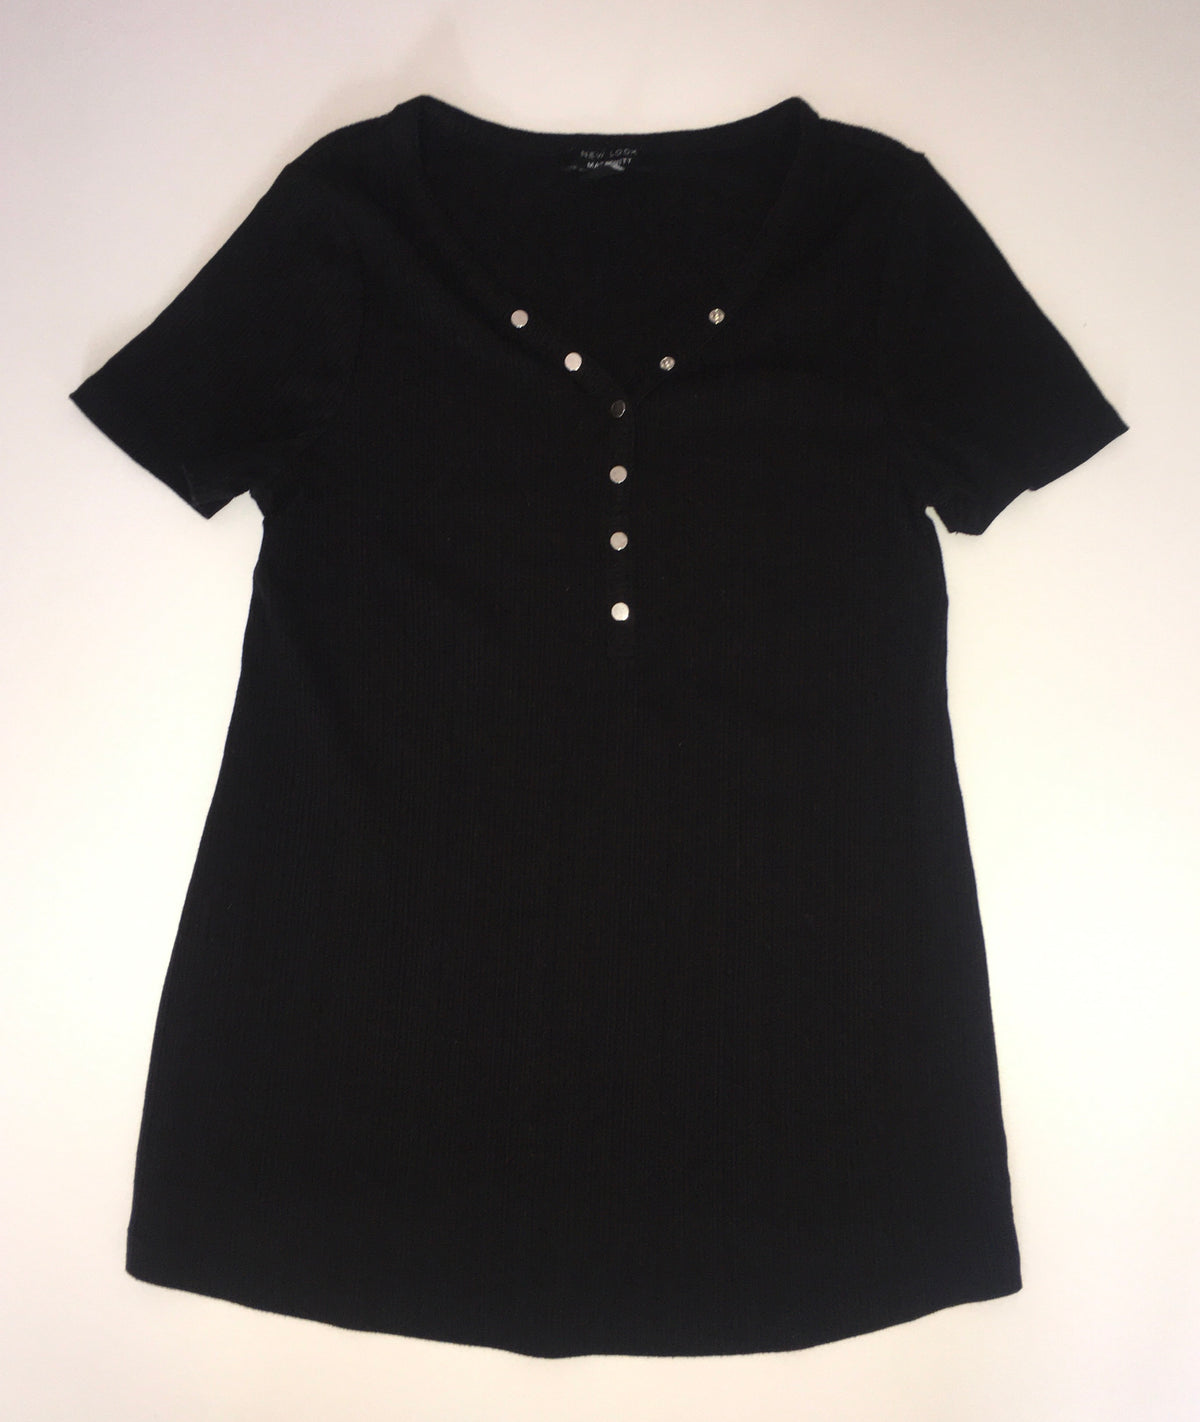 New Look Maternity Top, Size 10